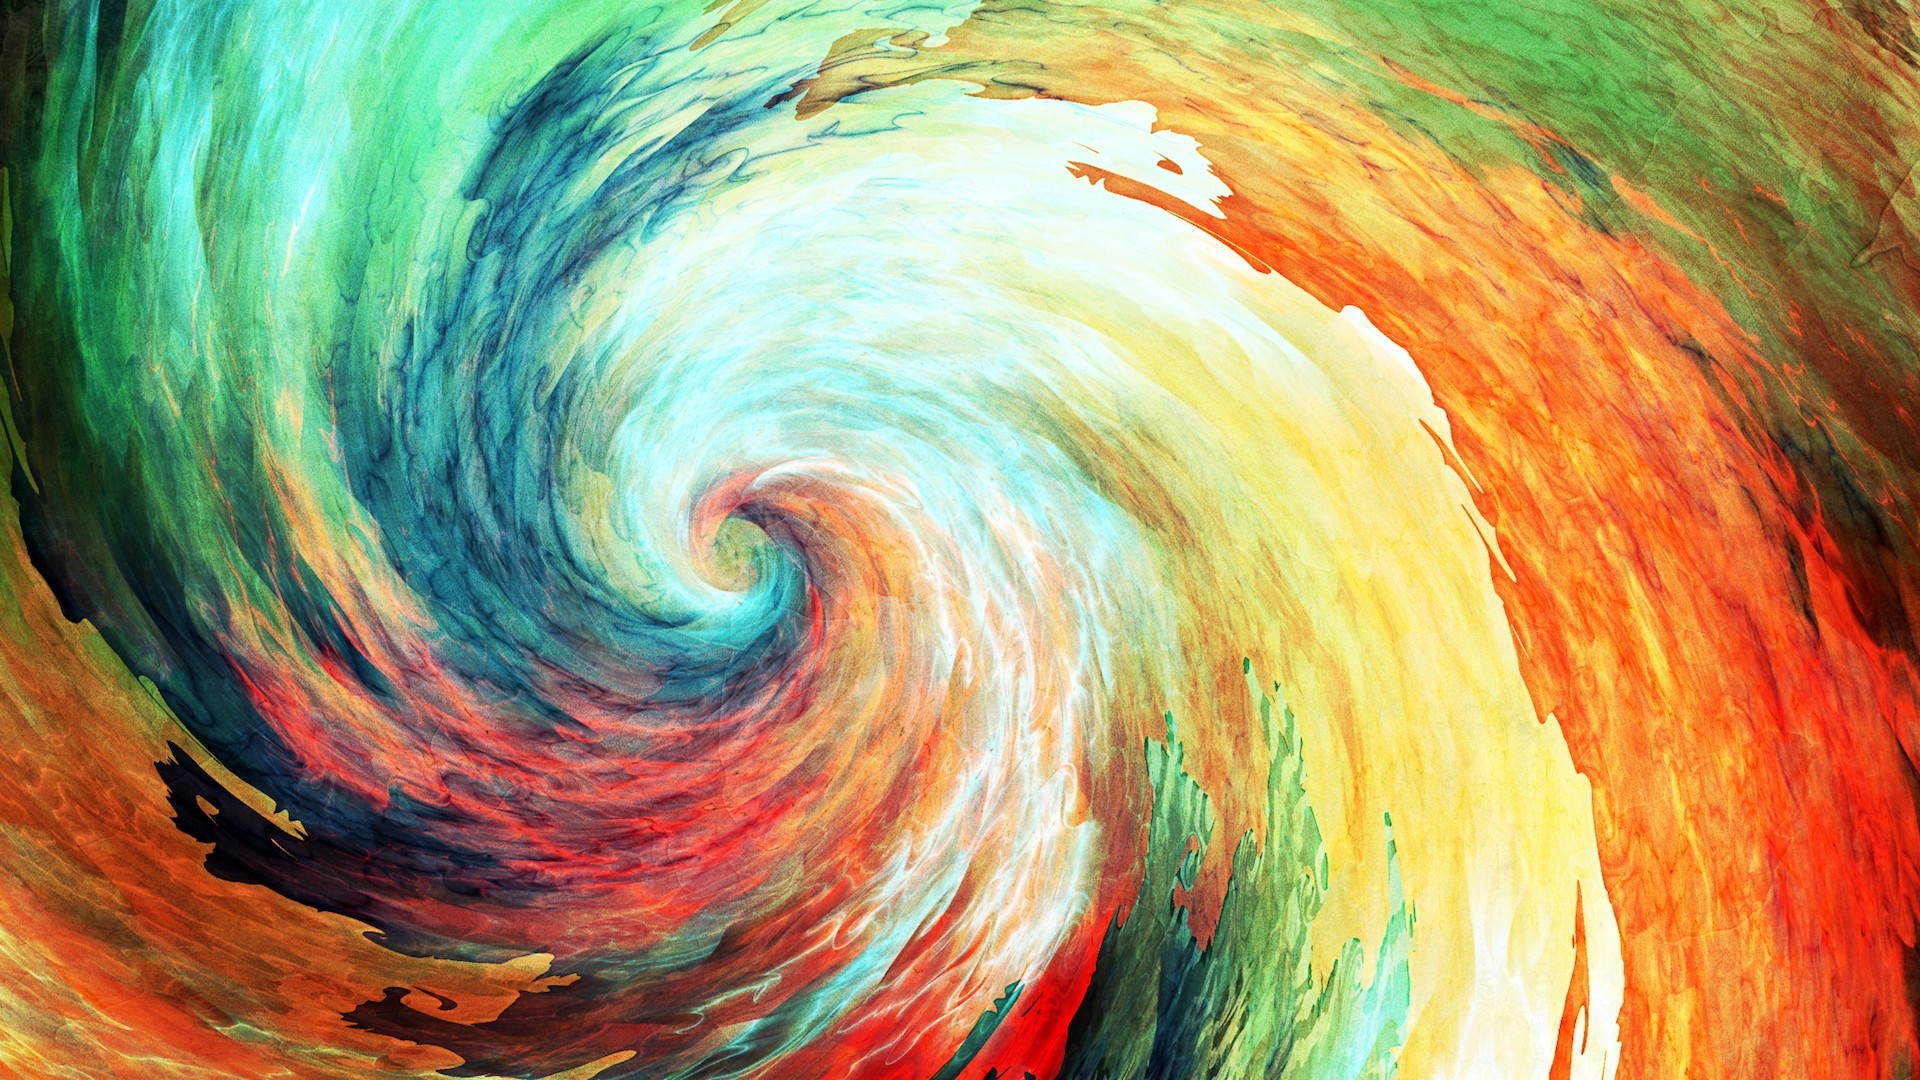 Anime Spiral Abstract Painting Artwork Colorful Hurricane Vortex Psychedelic Vibrant 1920x1080